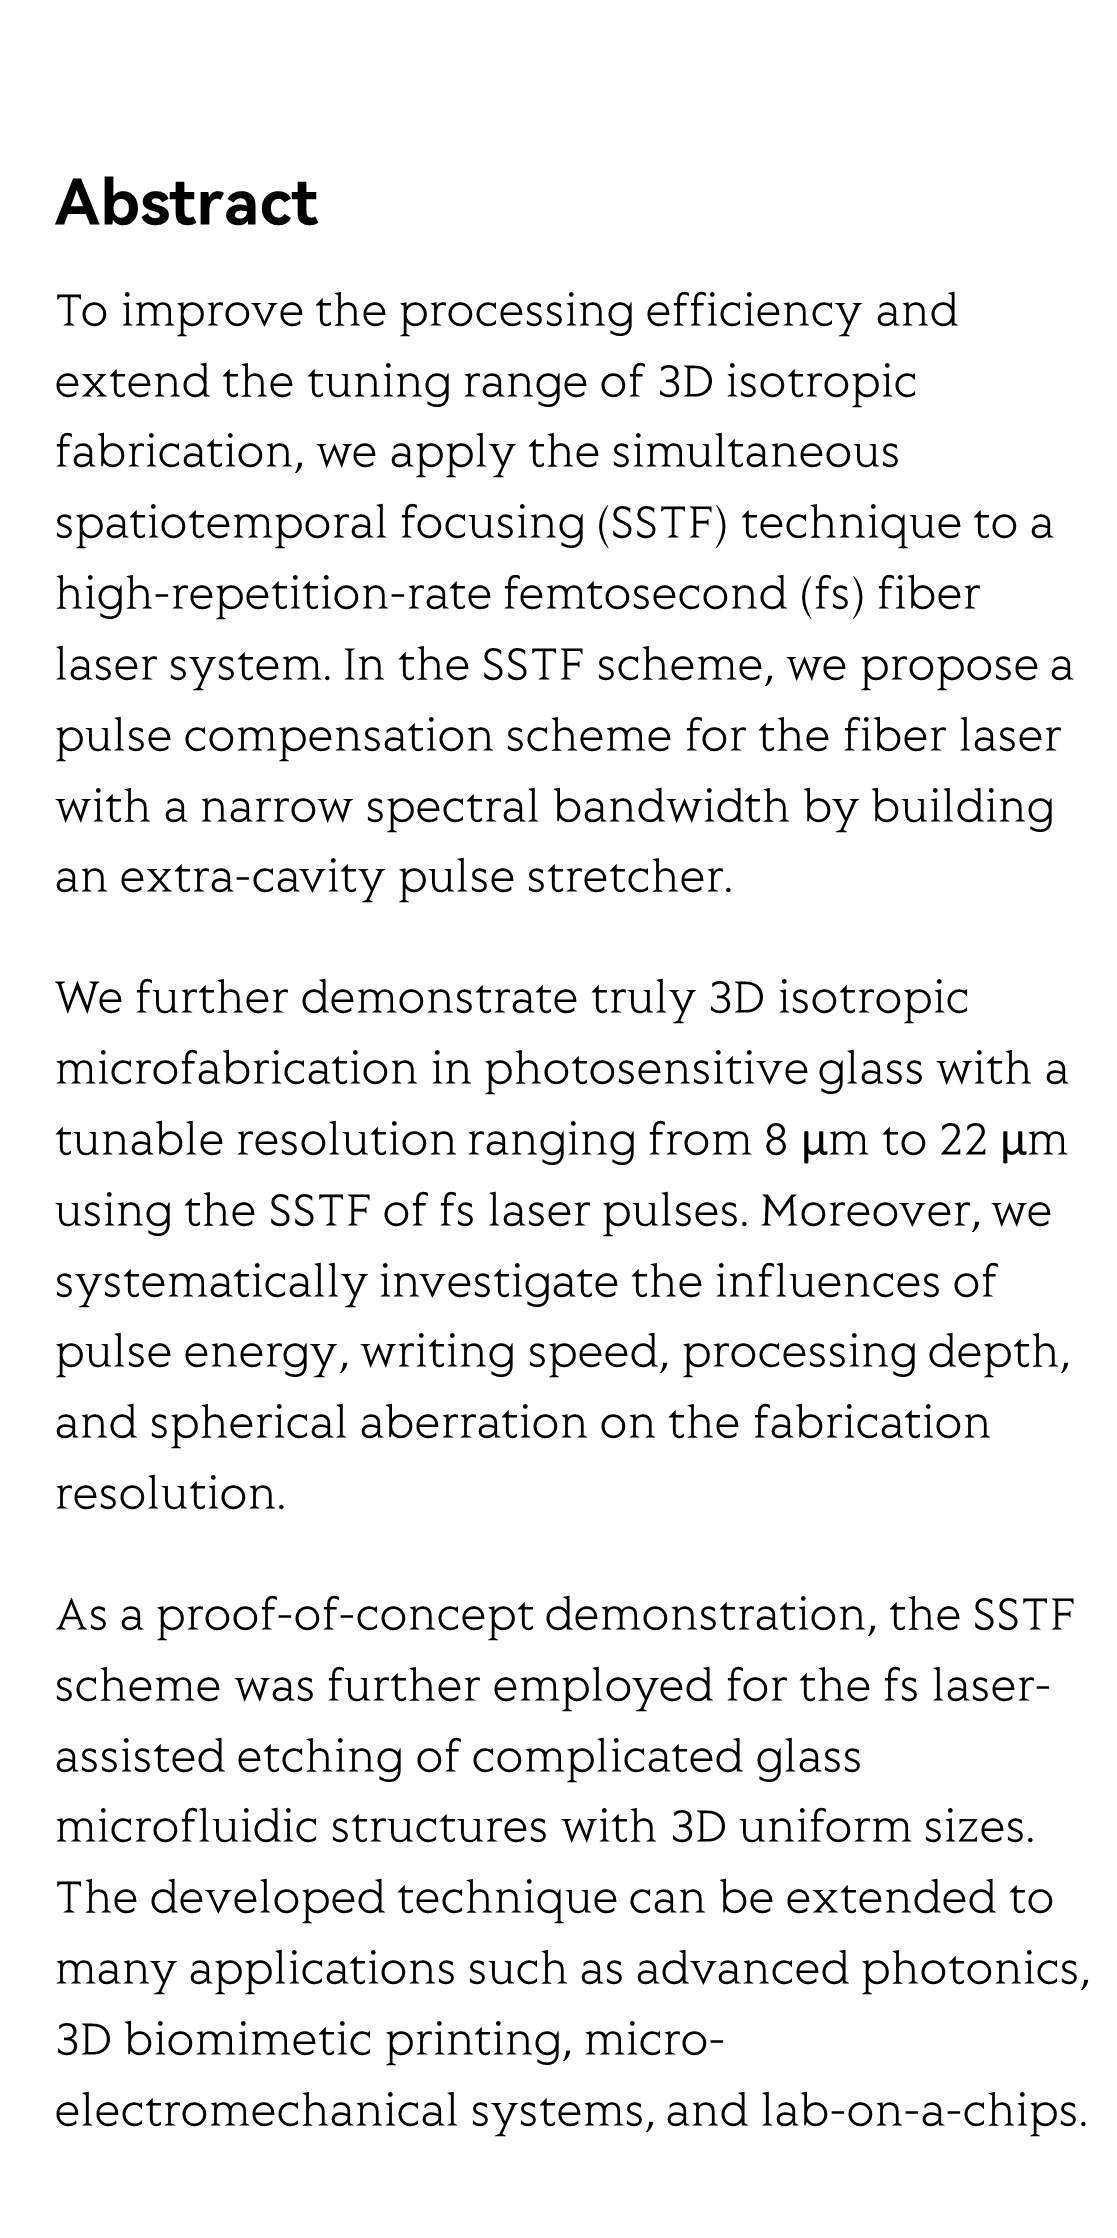 Three-dimensional isotropic microfabrication in glass using spatiotemporal focusing of high-repetition-rate femtosecond laser pulses_2